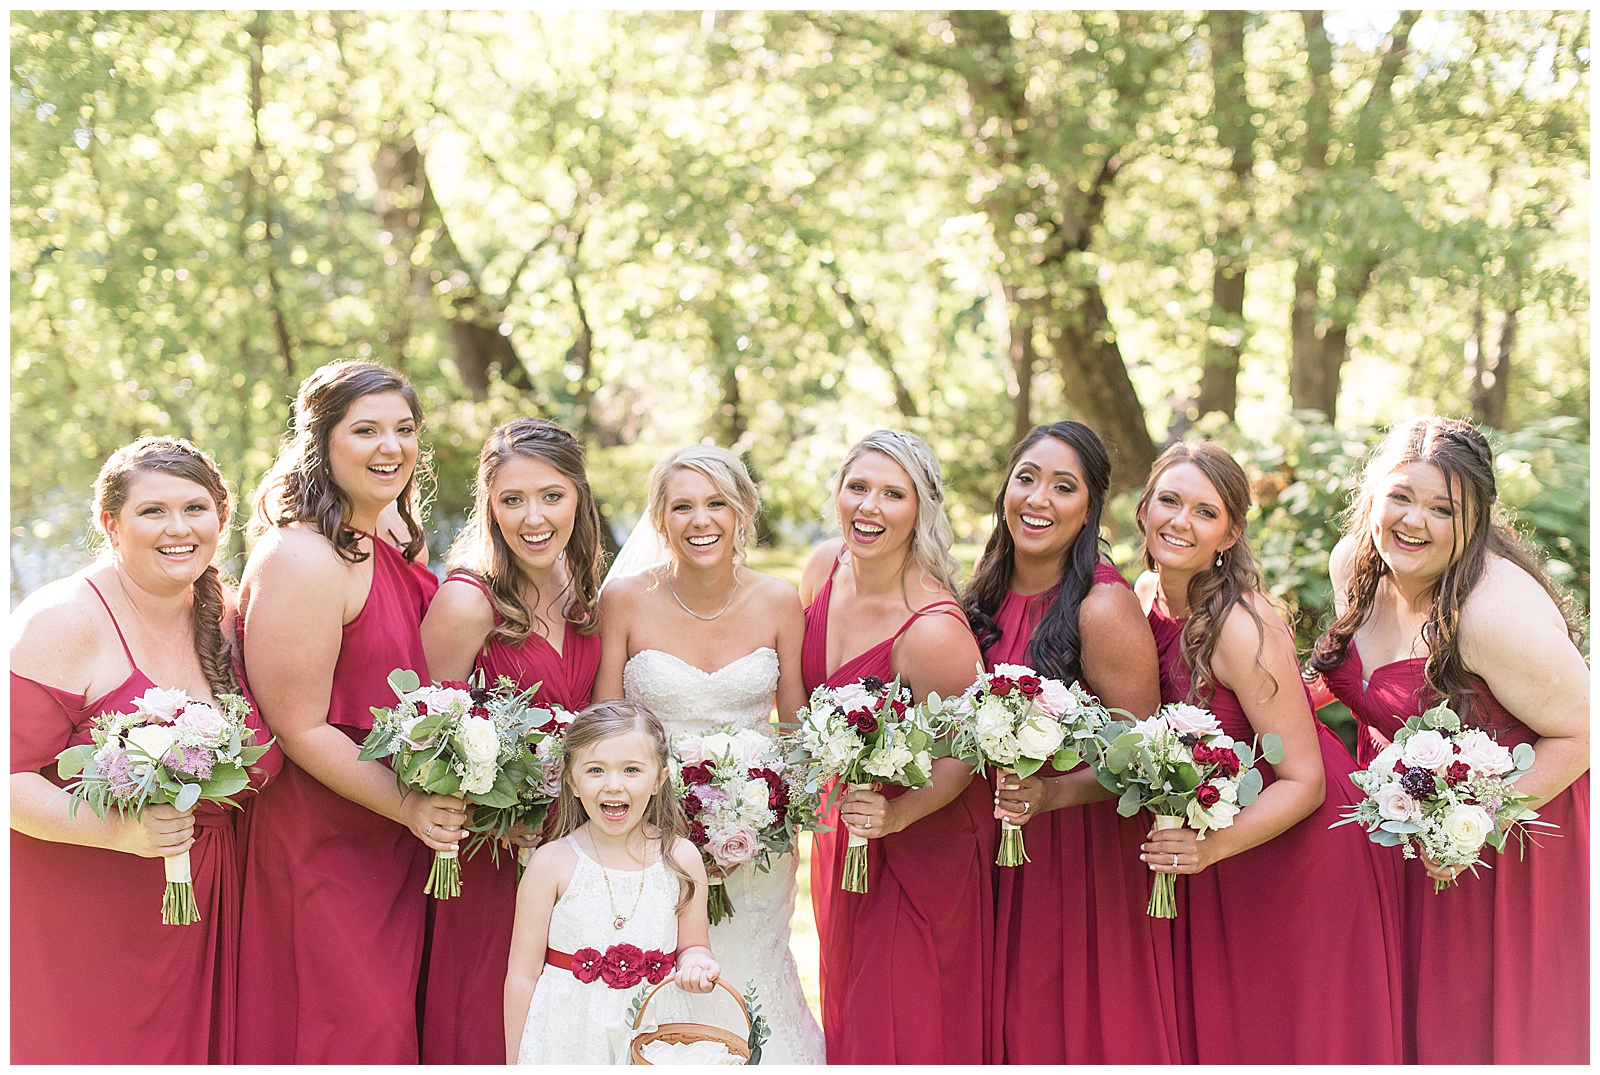 close up photo of the bride with her bridesmaids and flowergirl all holding their flowers and smiling at the camera with trees and sunshine in the background at Riverdale Manor in Lancaster, PA